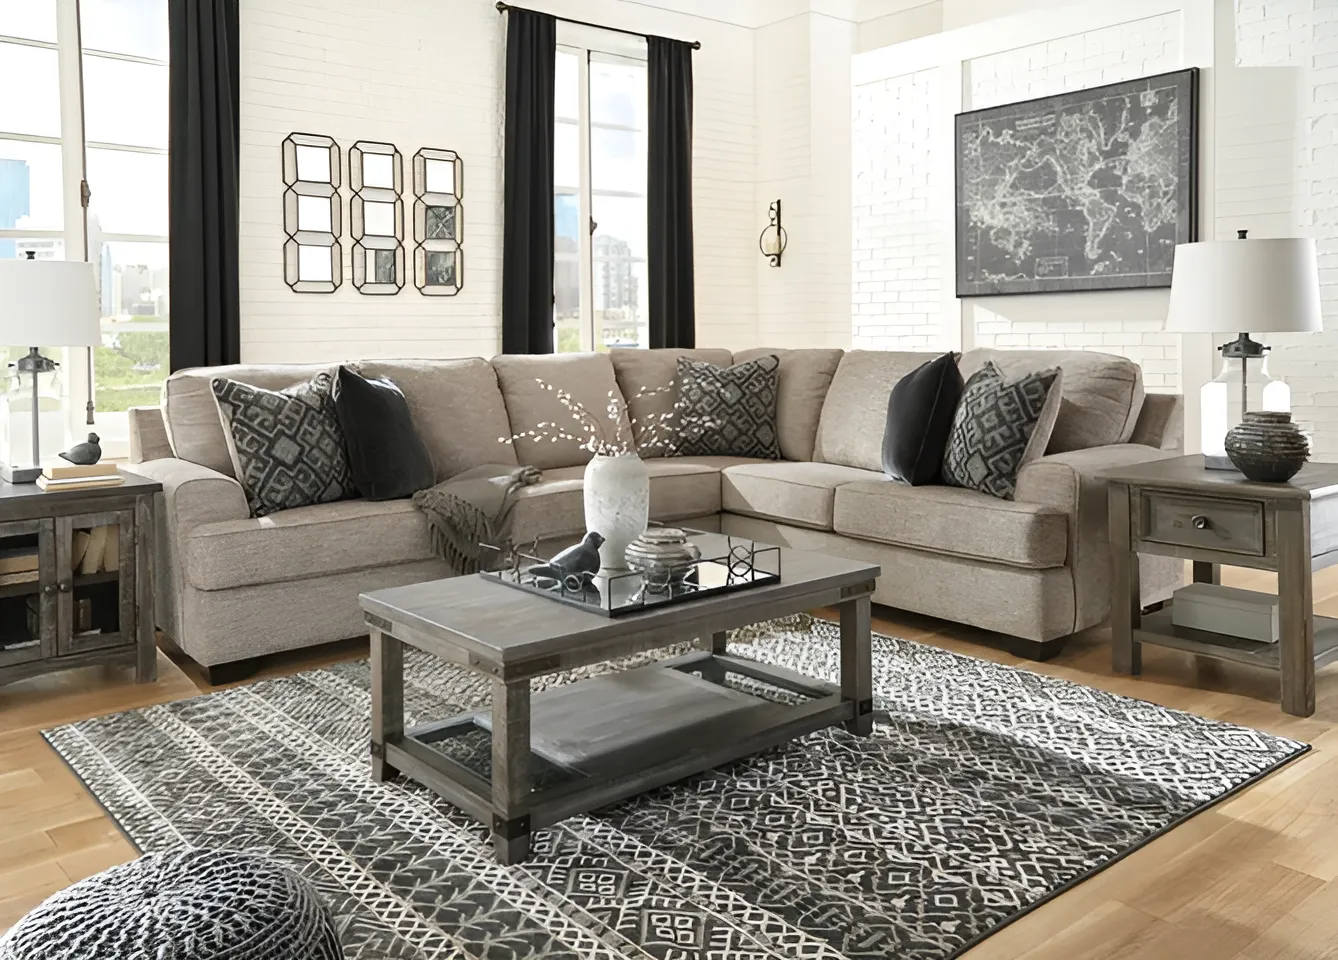 Your Trusty Guide to Interior Styling and Buying Furniture Online (Part 1)